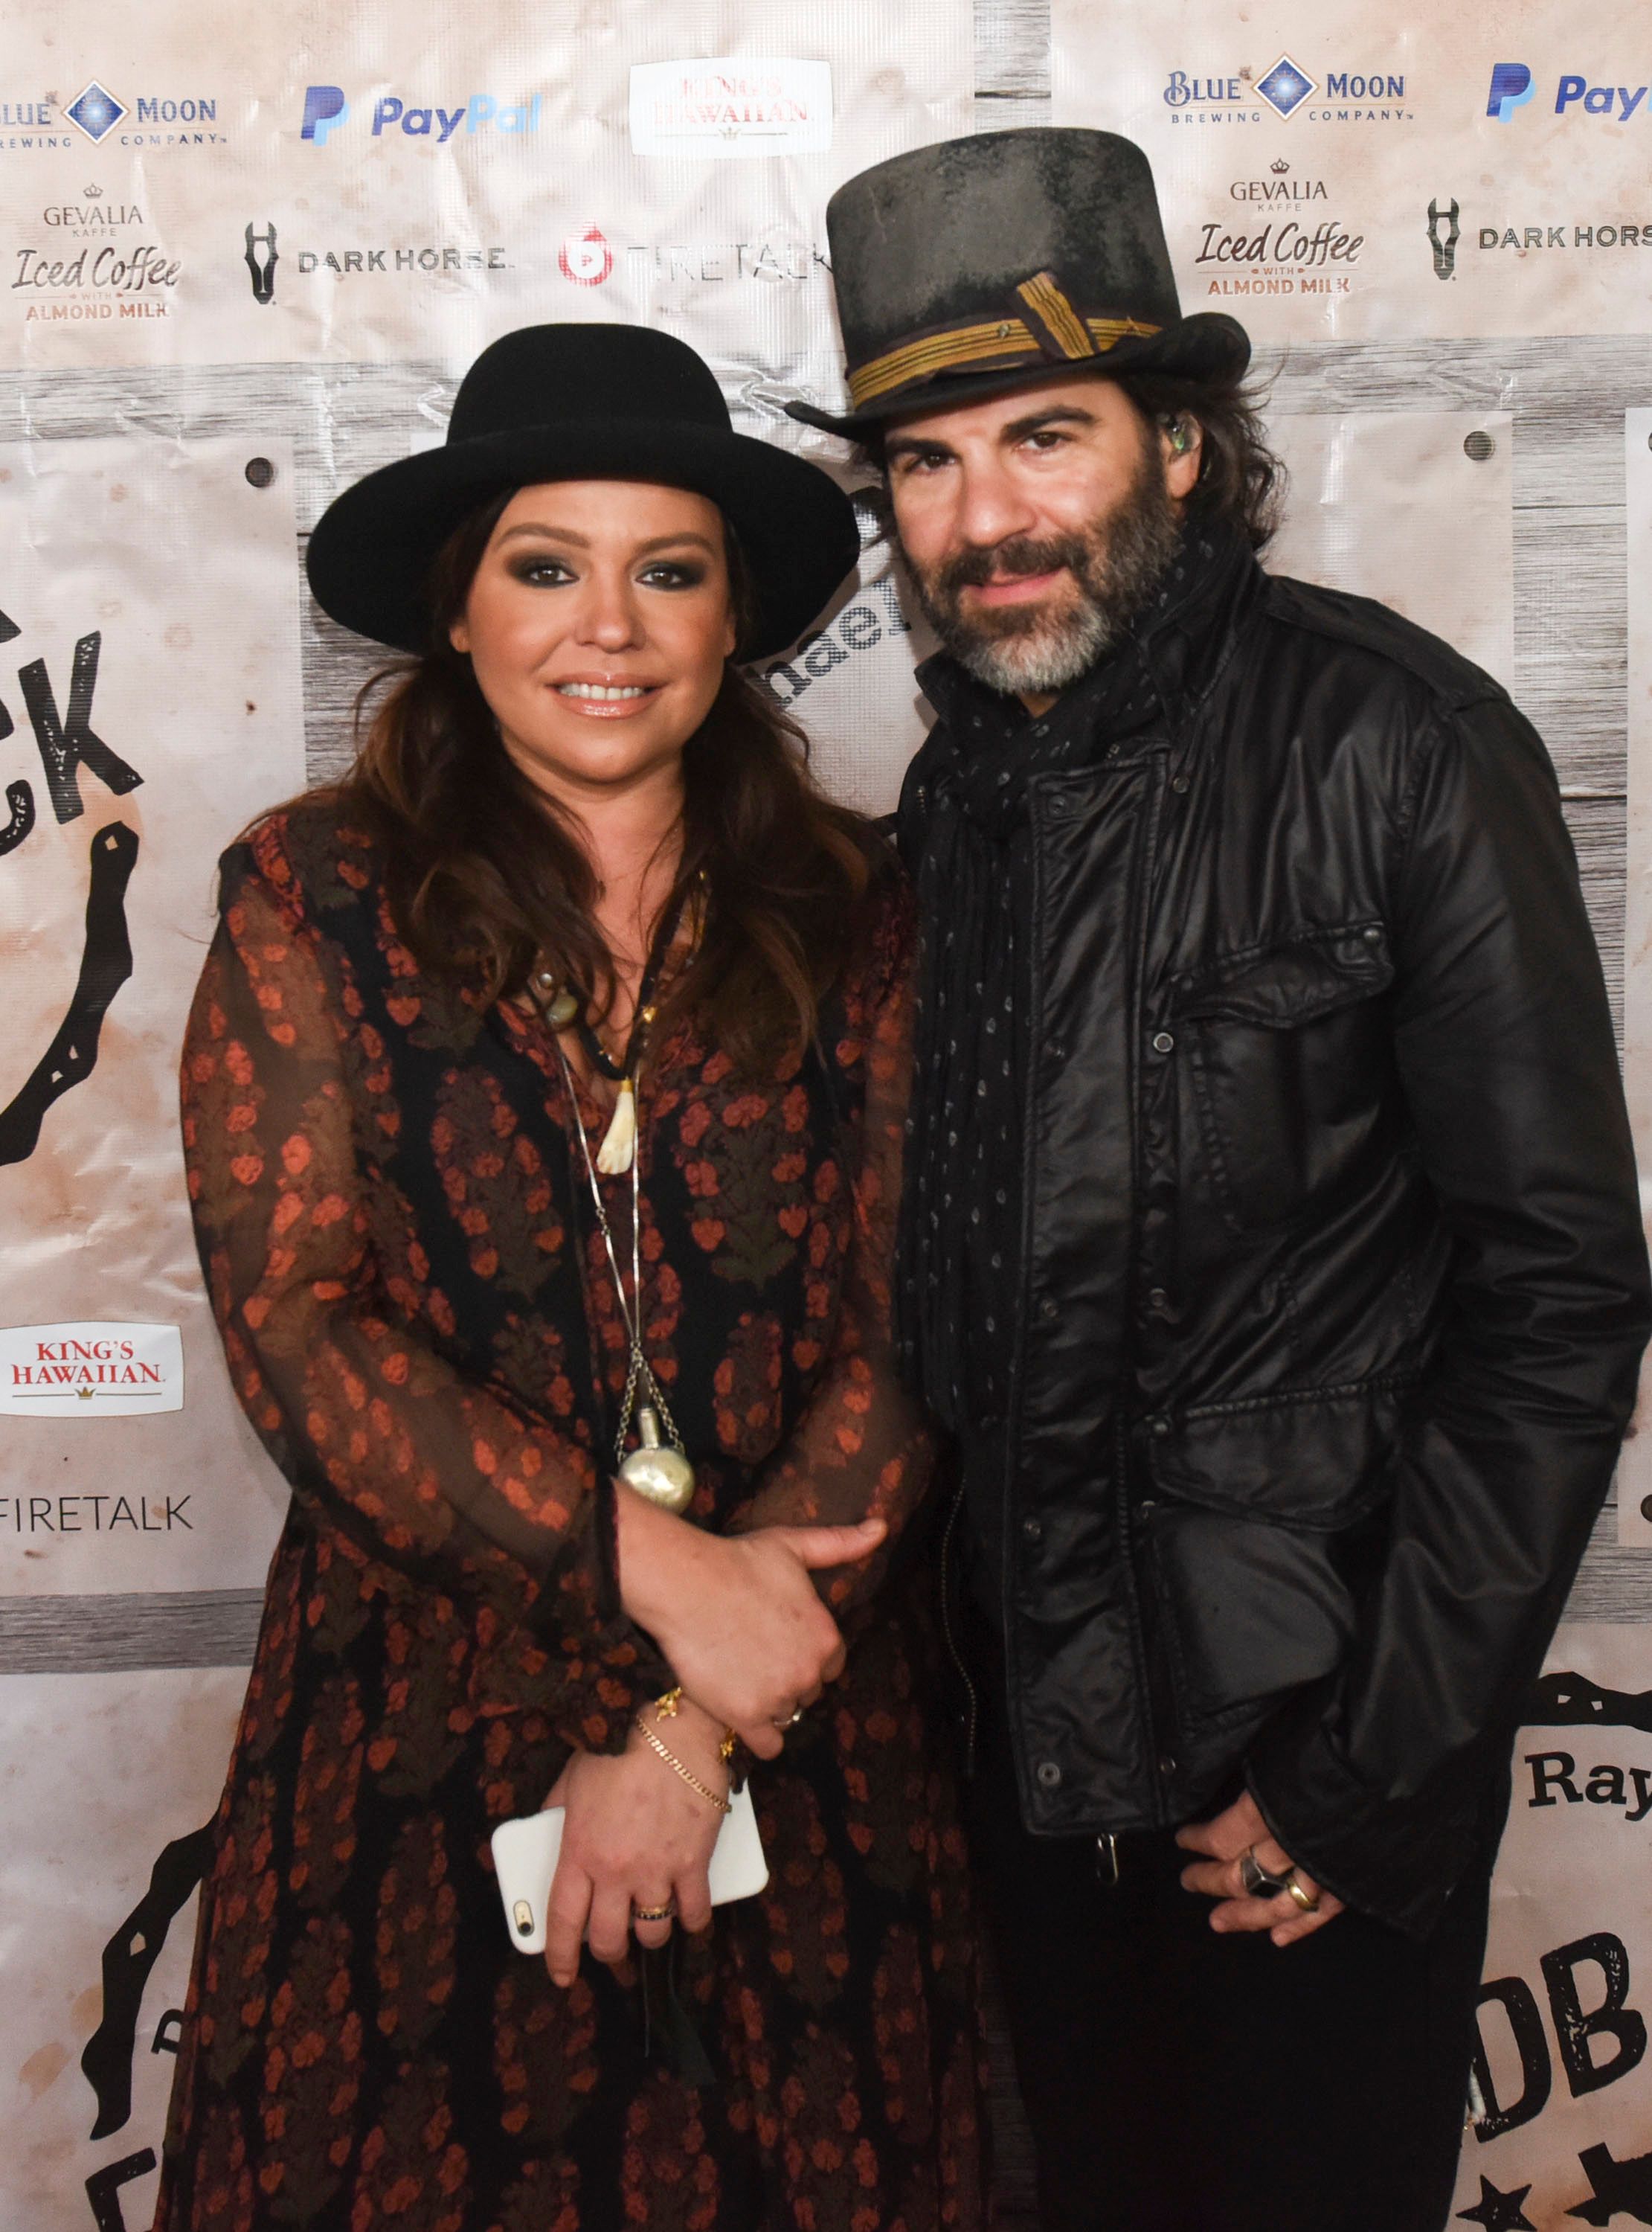 Rachael Ray and John Cusimano attend Gevalia Iced Coffee with Almond Milk at Rachael Ray's Feedback House on March 21, 2015, in Austin, Texas. | Source: Getty Images